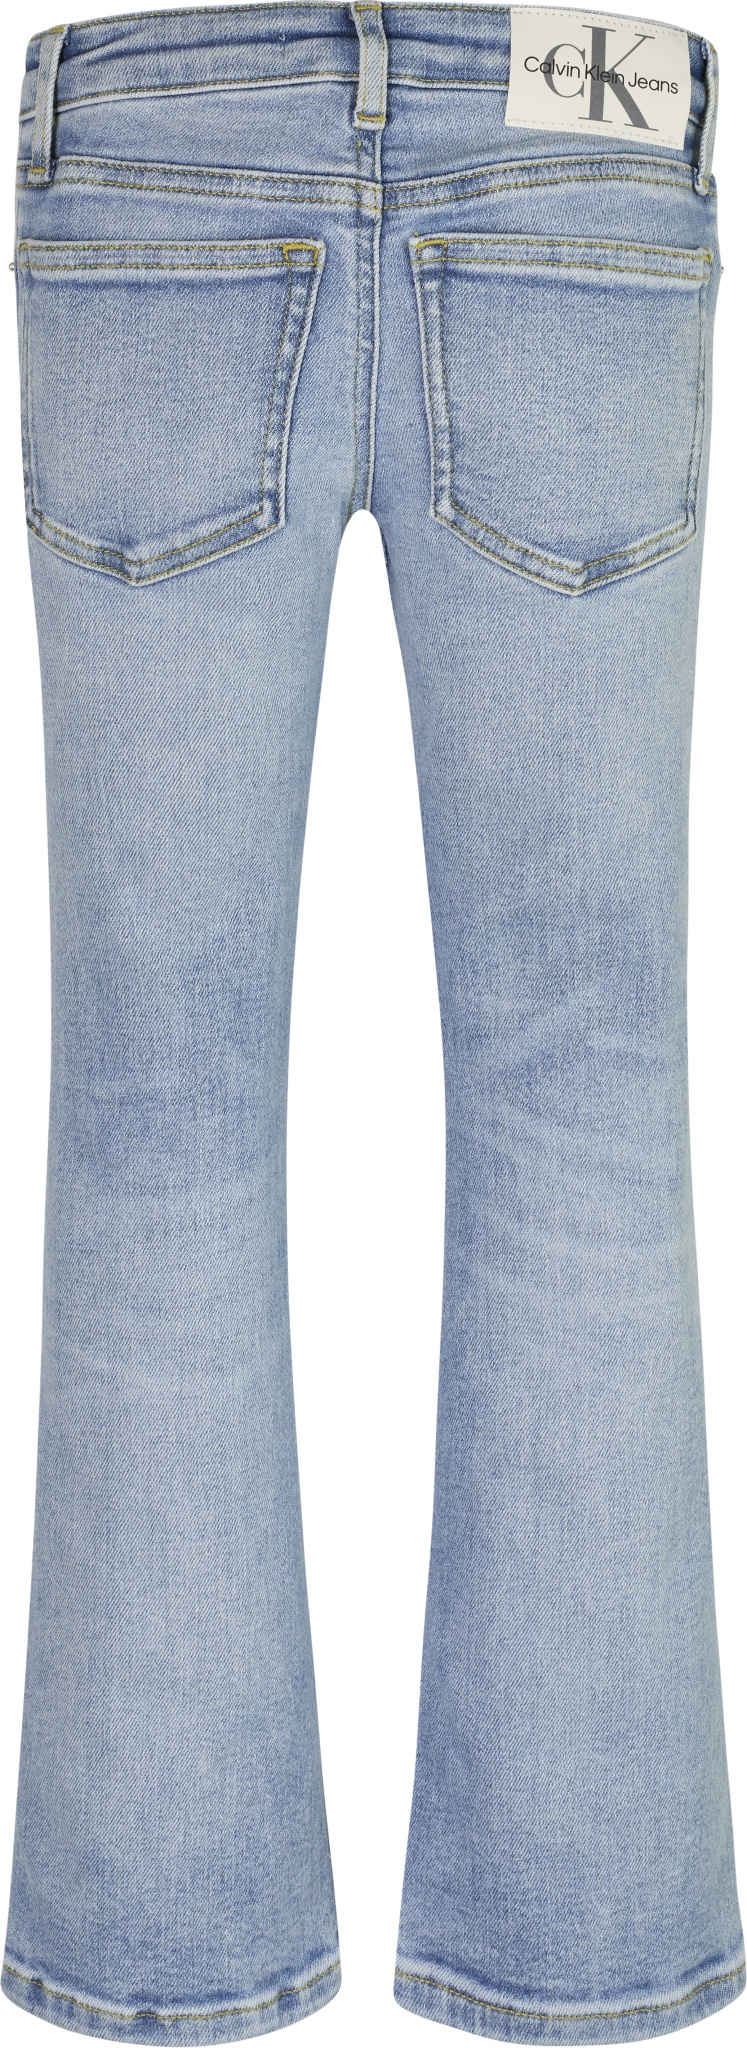 CALVIN KLEIN Flare Fit Jeans 10674640